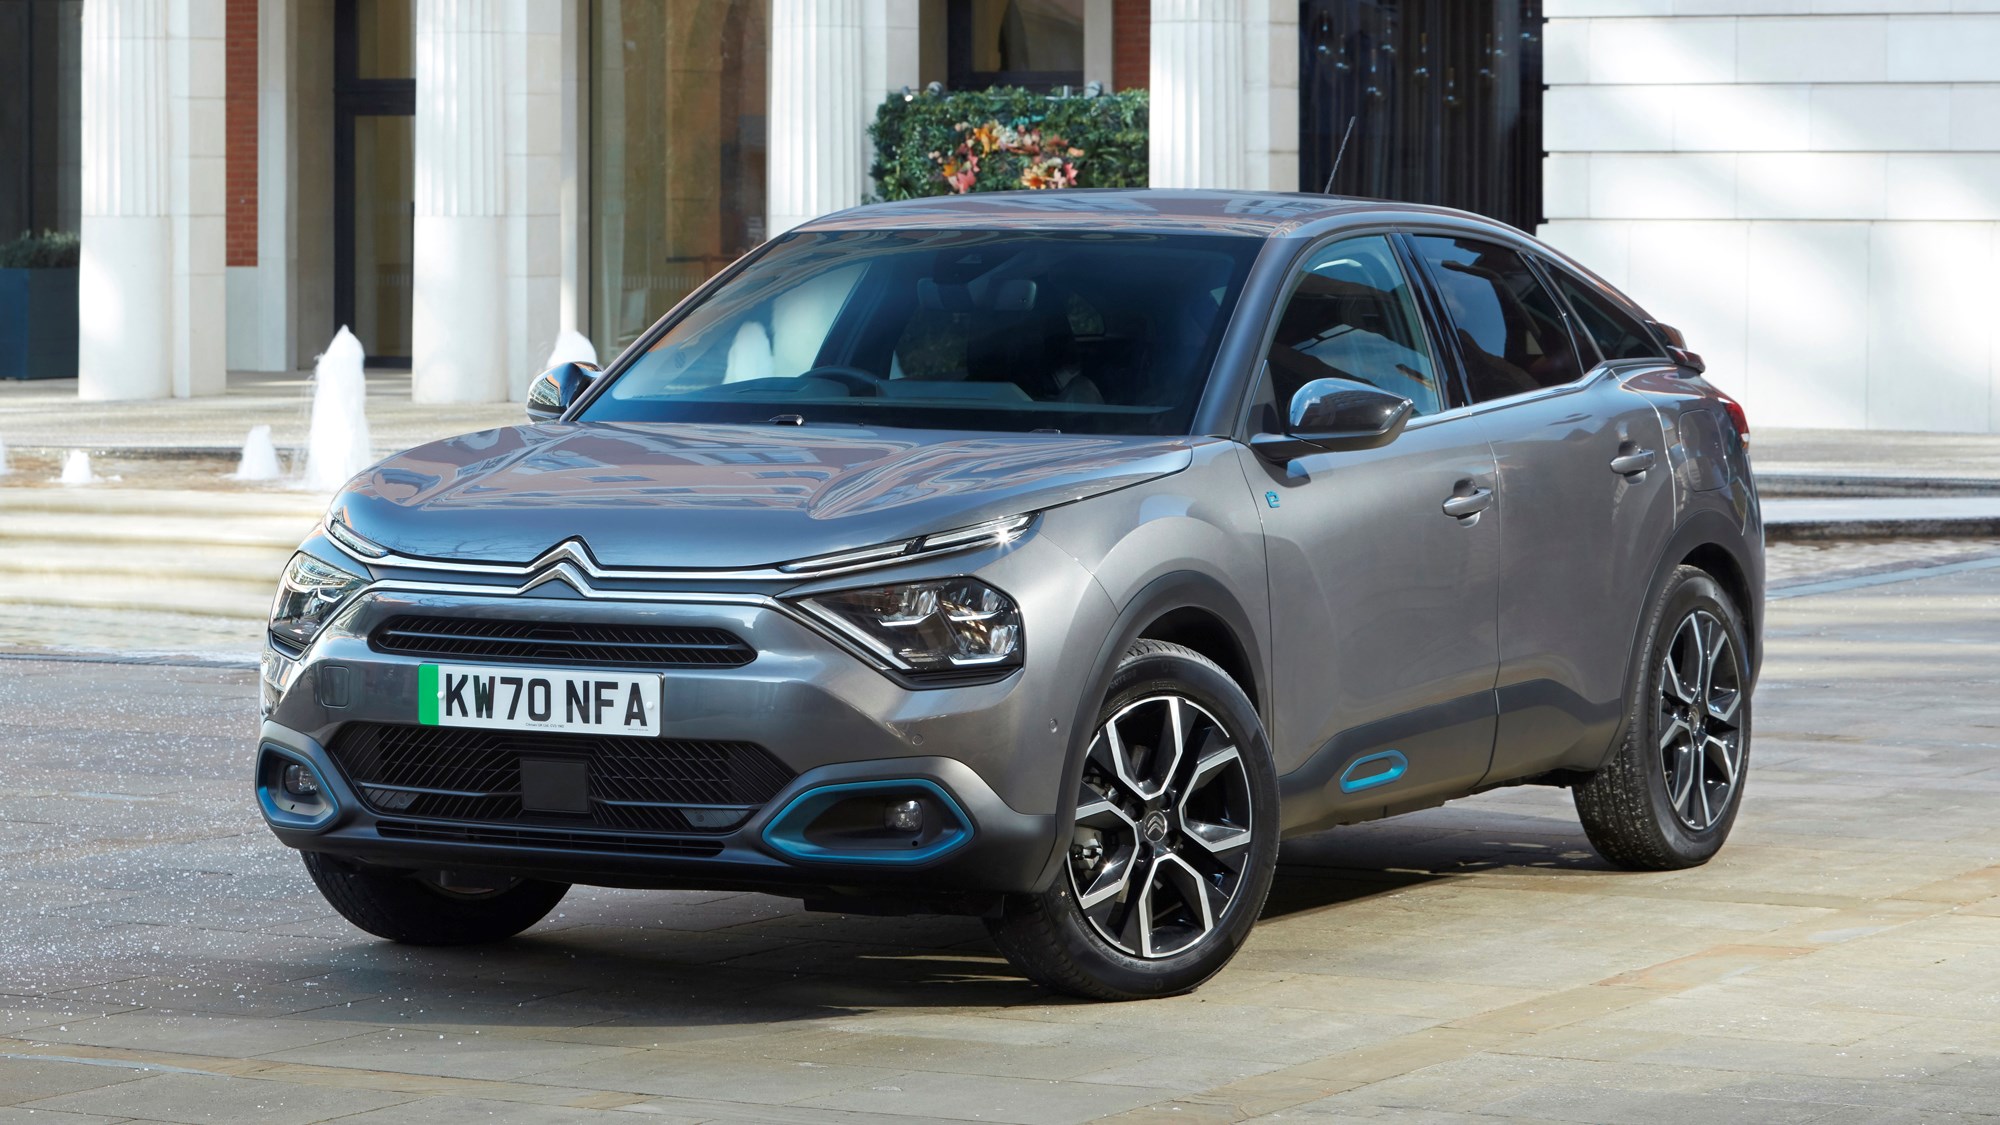 Citroen electric car review: is comfort and individuality enough? | Magazine